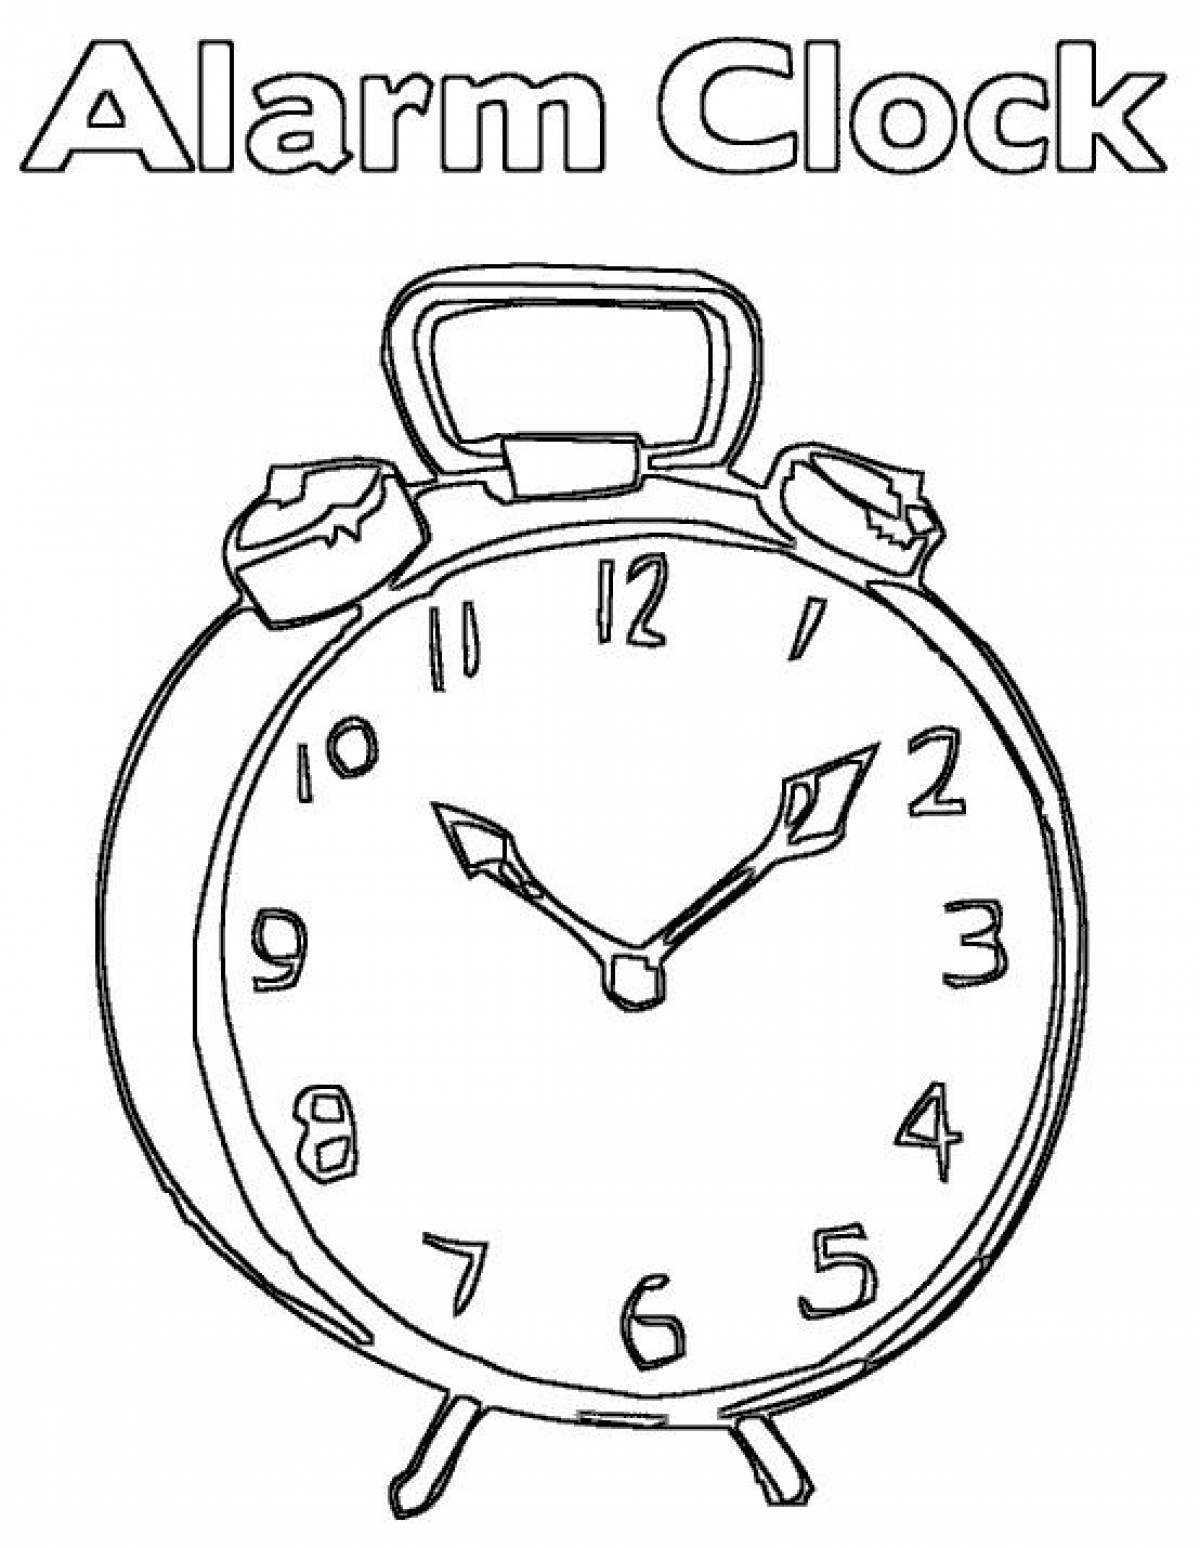 Animated alarm clock coloring page